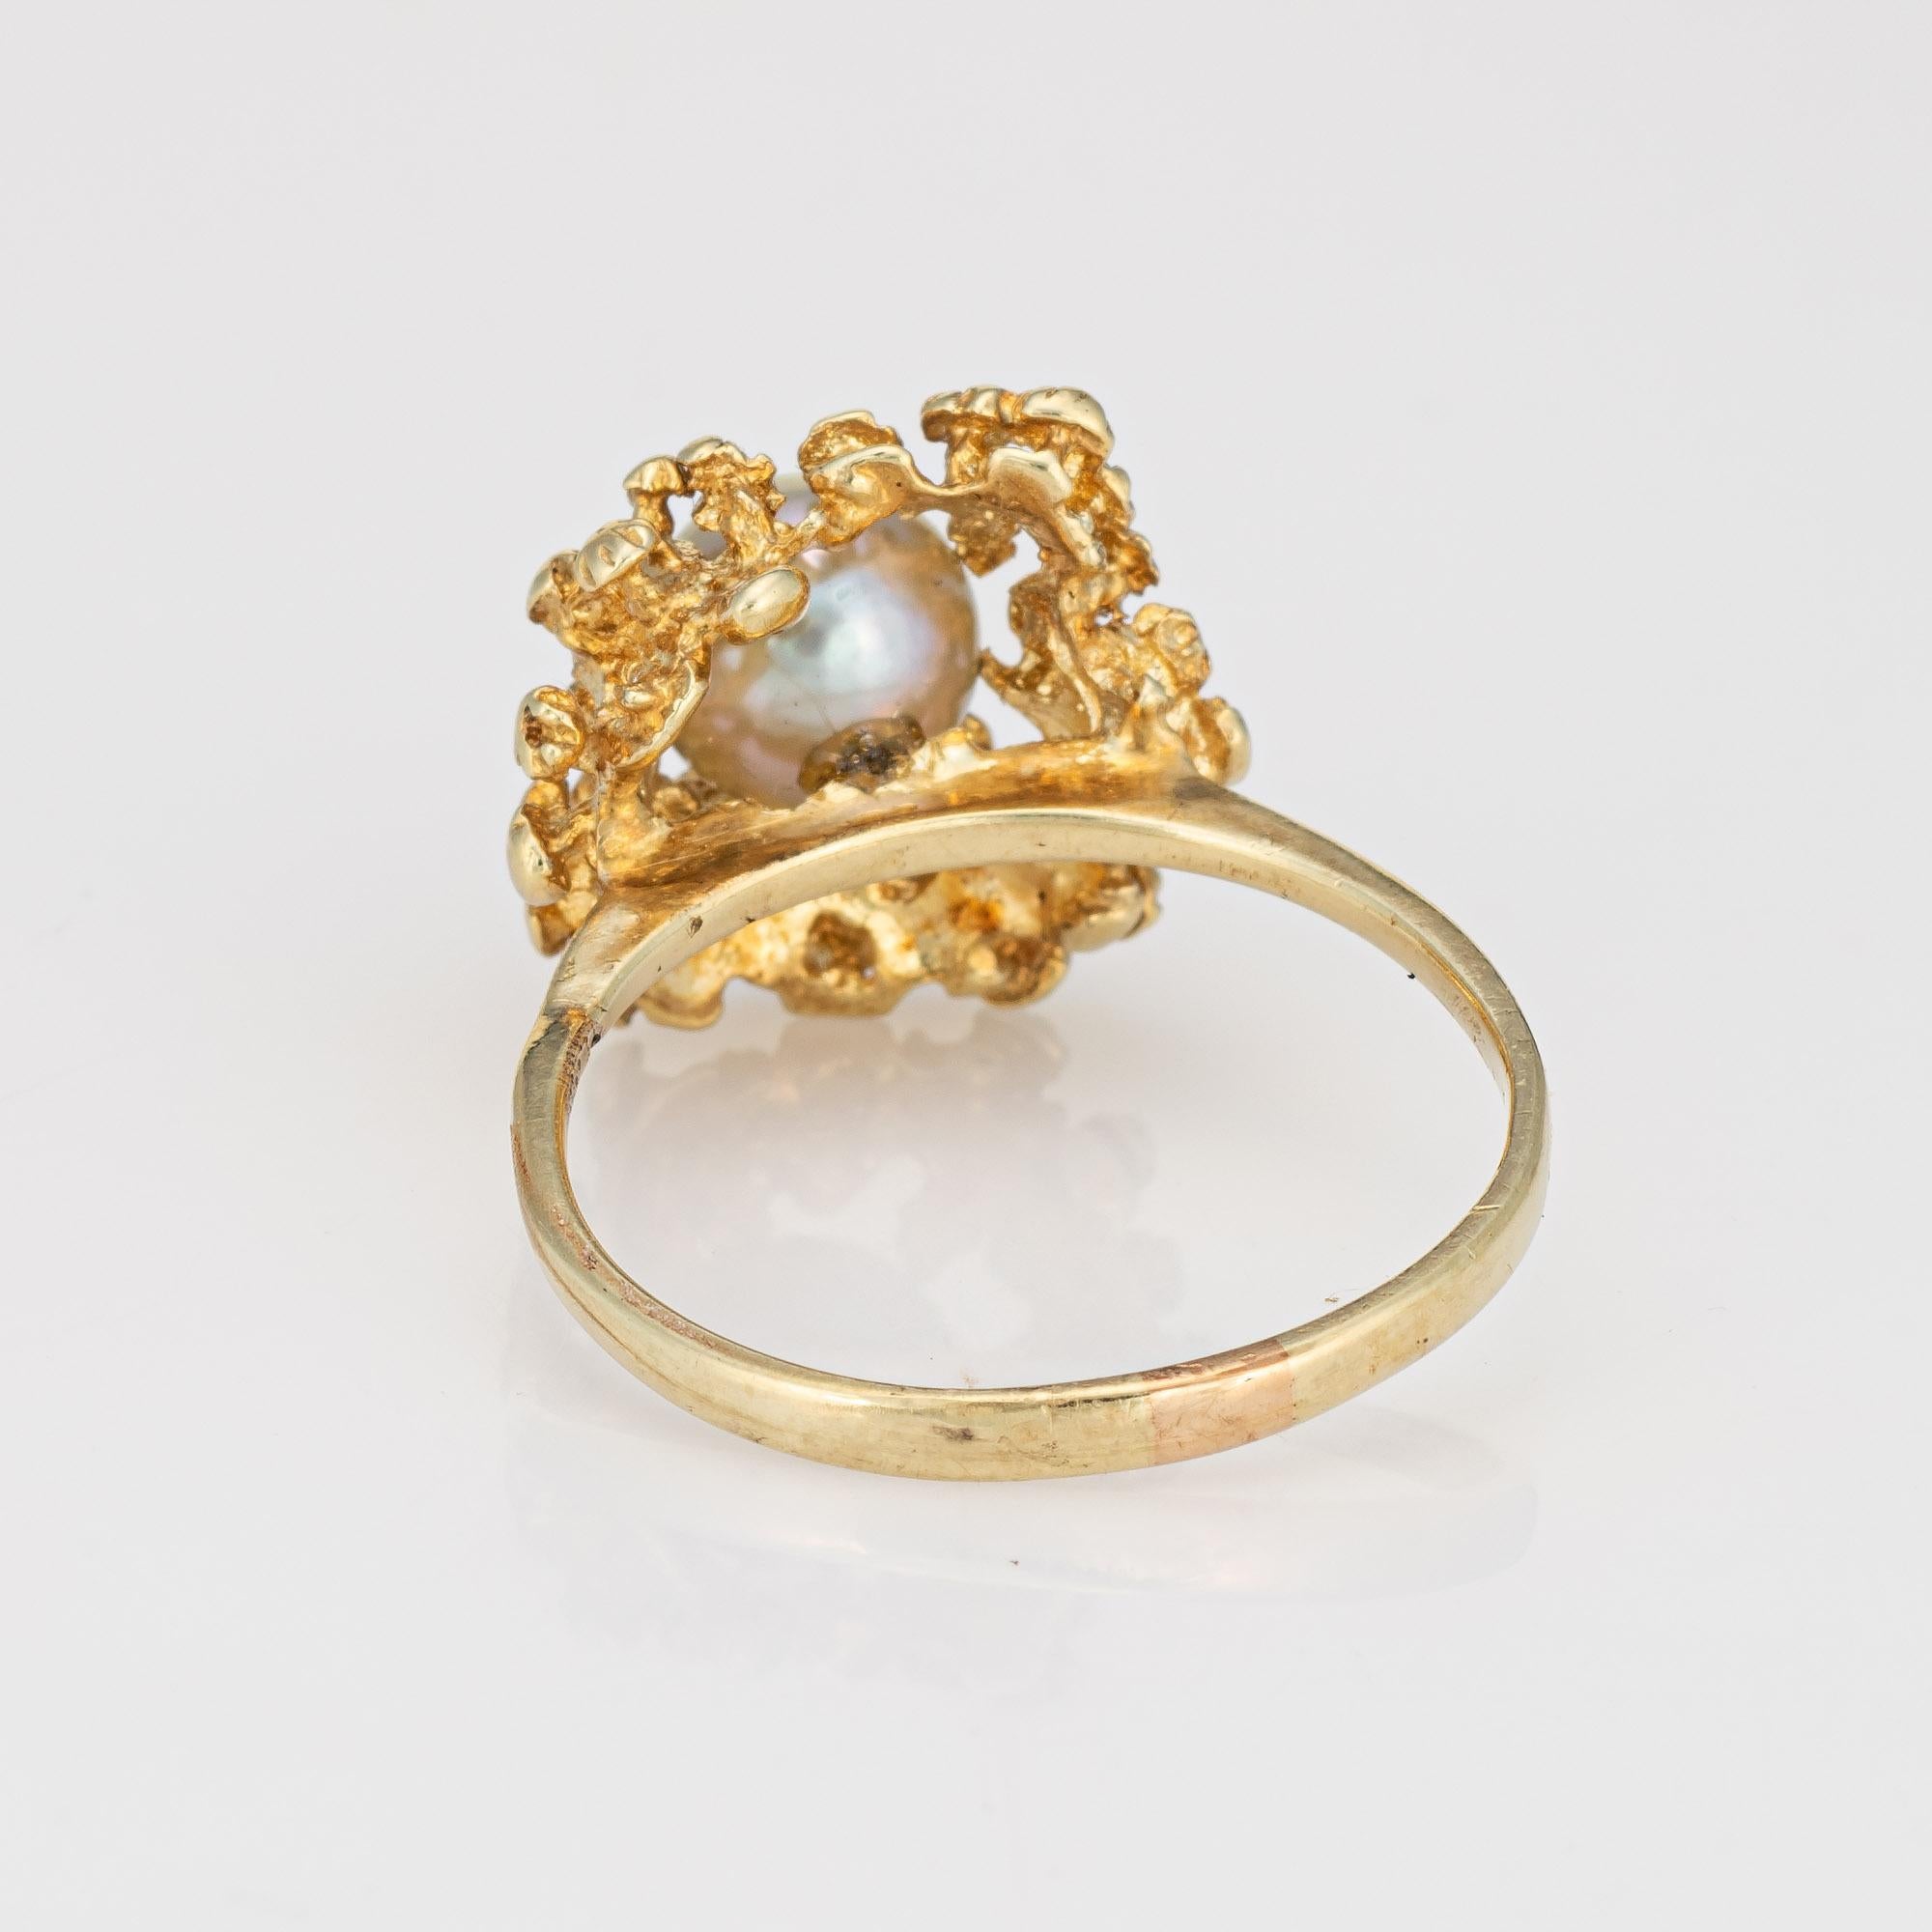 Vintage Cultured Pearl Ring Abstract Nugget 14k Yellow Gold Sz 7 Fine Jewelry In Good Condition For Sale In Torrance, CA